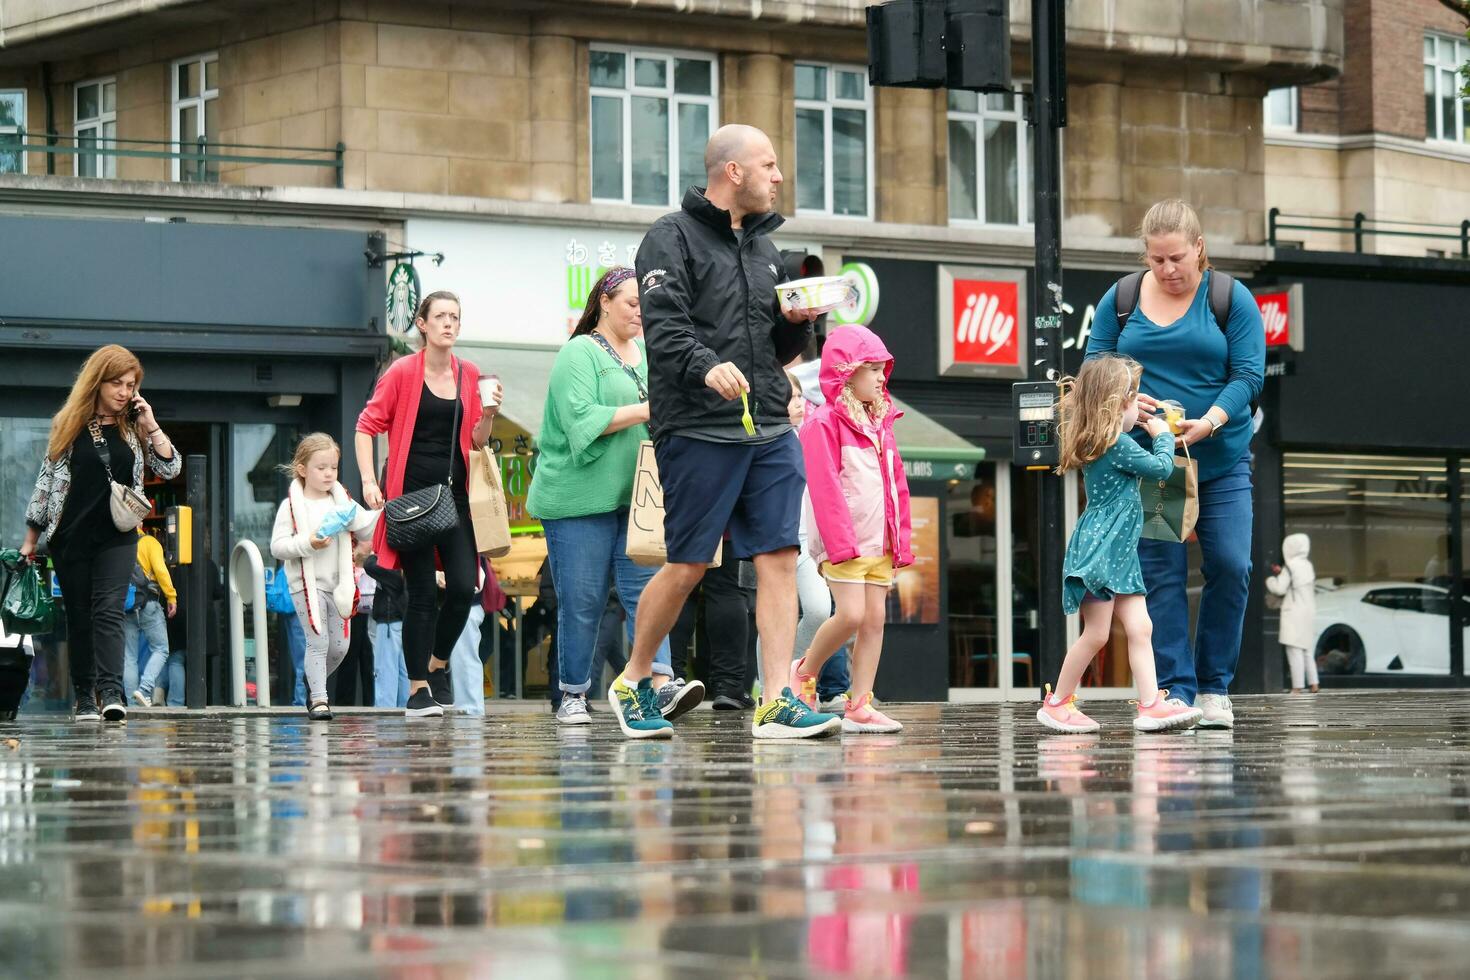 Most Beautiful Image of International and Local Tourist People are Visiting The Central London Capital City of England UK During Rainy Day. Captured on August 2nd, 2023 photo